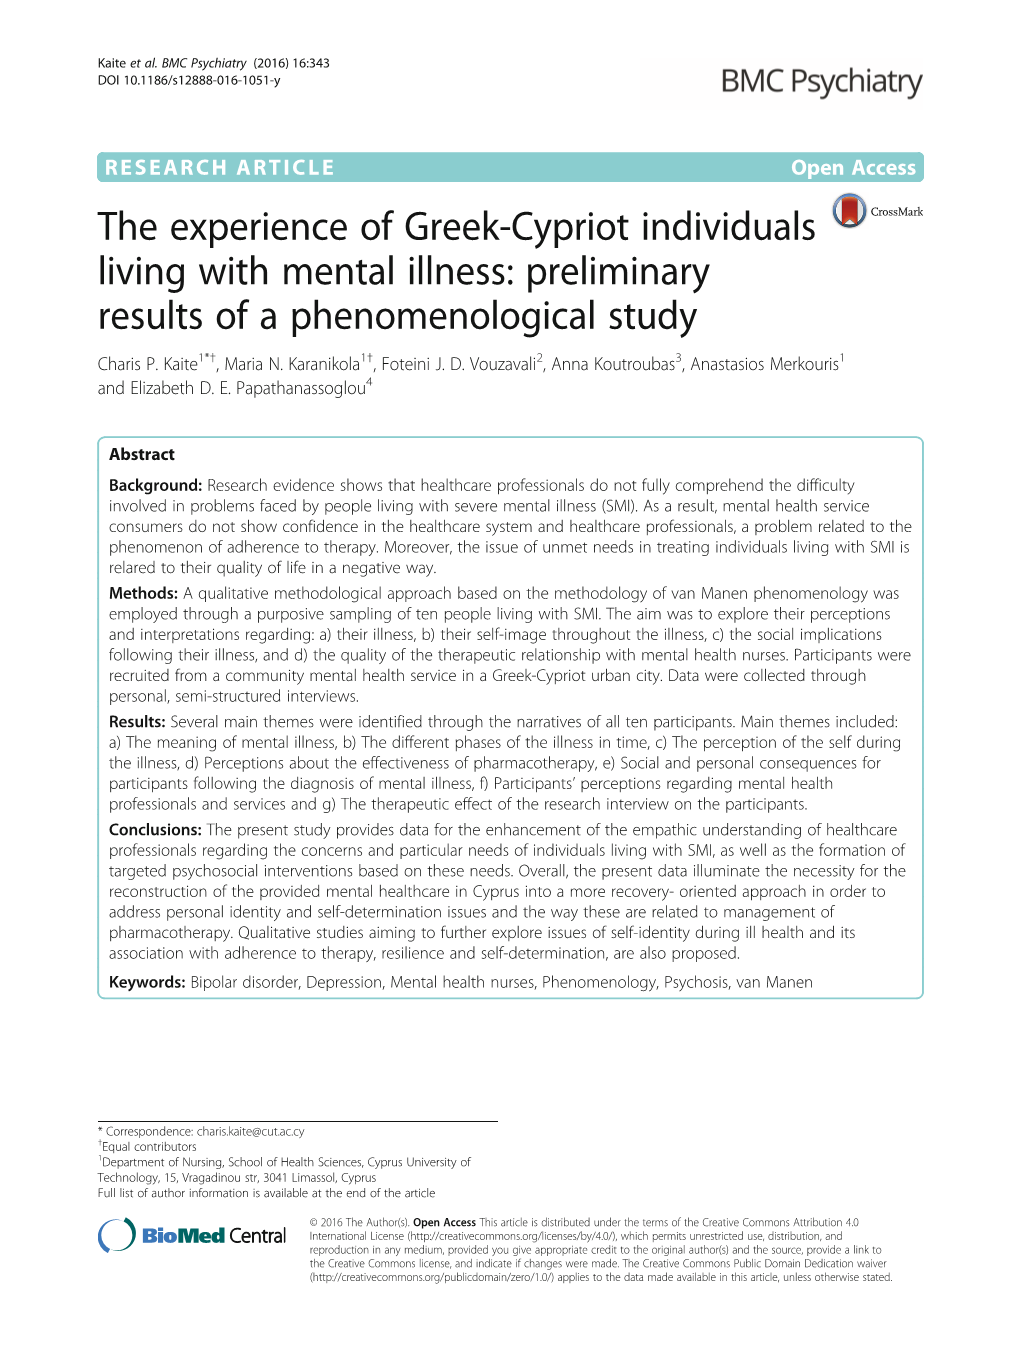 The Experience of Greek-Cypriot Individuals Living with Mental Illness: Preliminary Results of a Phenomenological Study Charis P